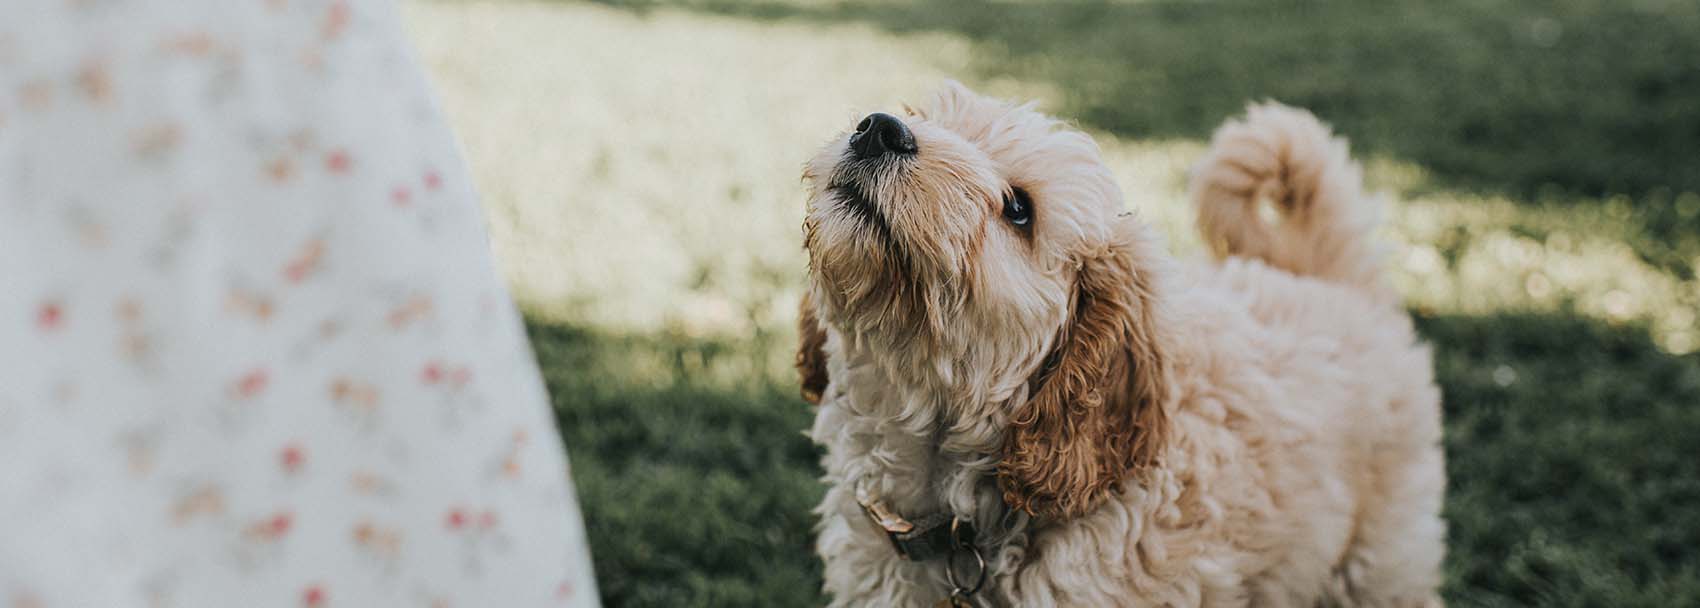 A cockapoo puppy looks up patiently at his owner